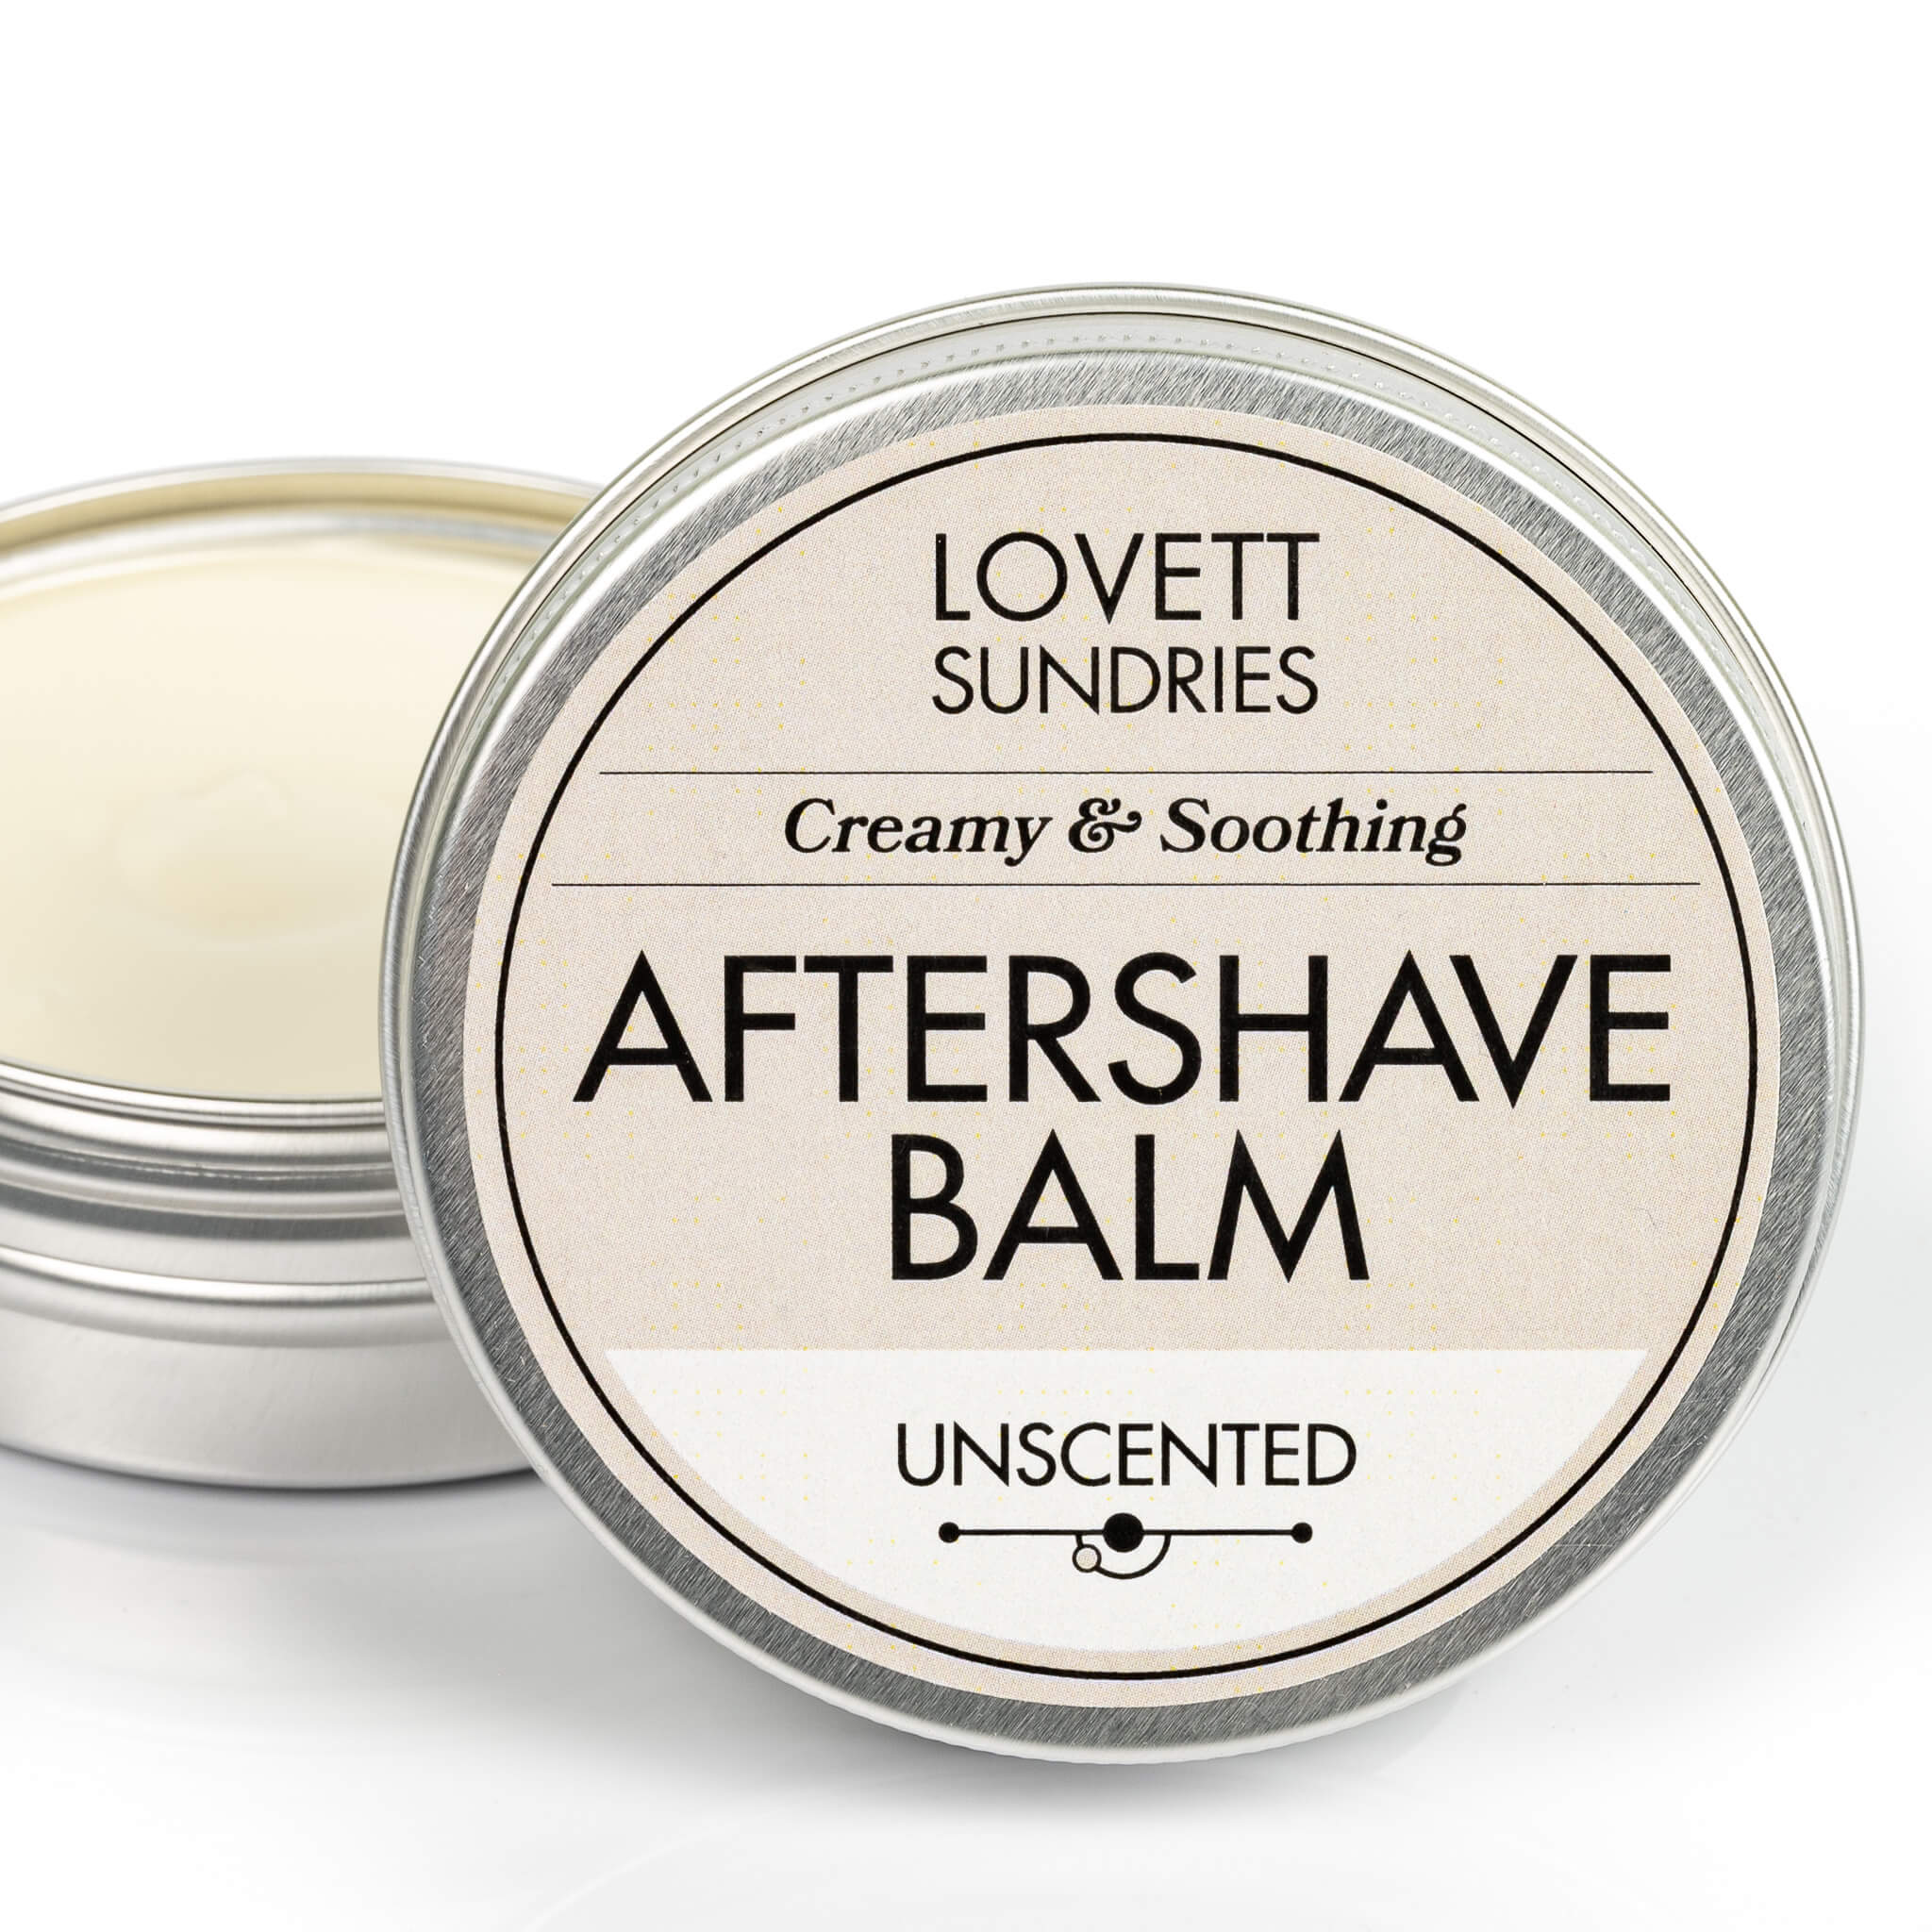 All natural unscented aftershave balm